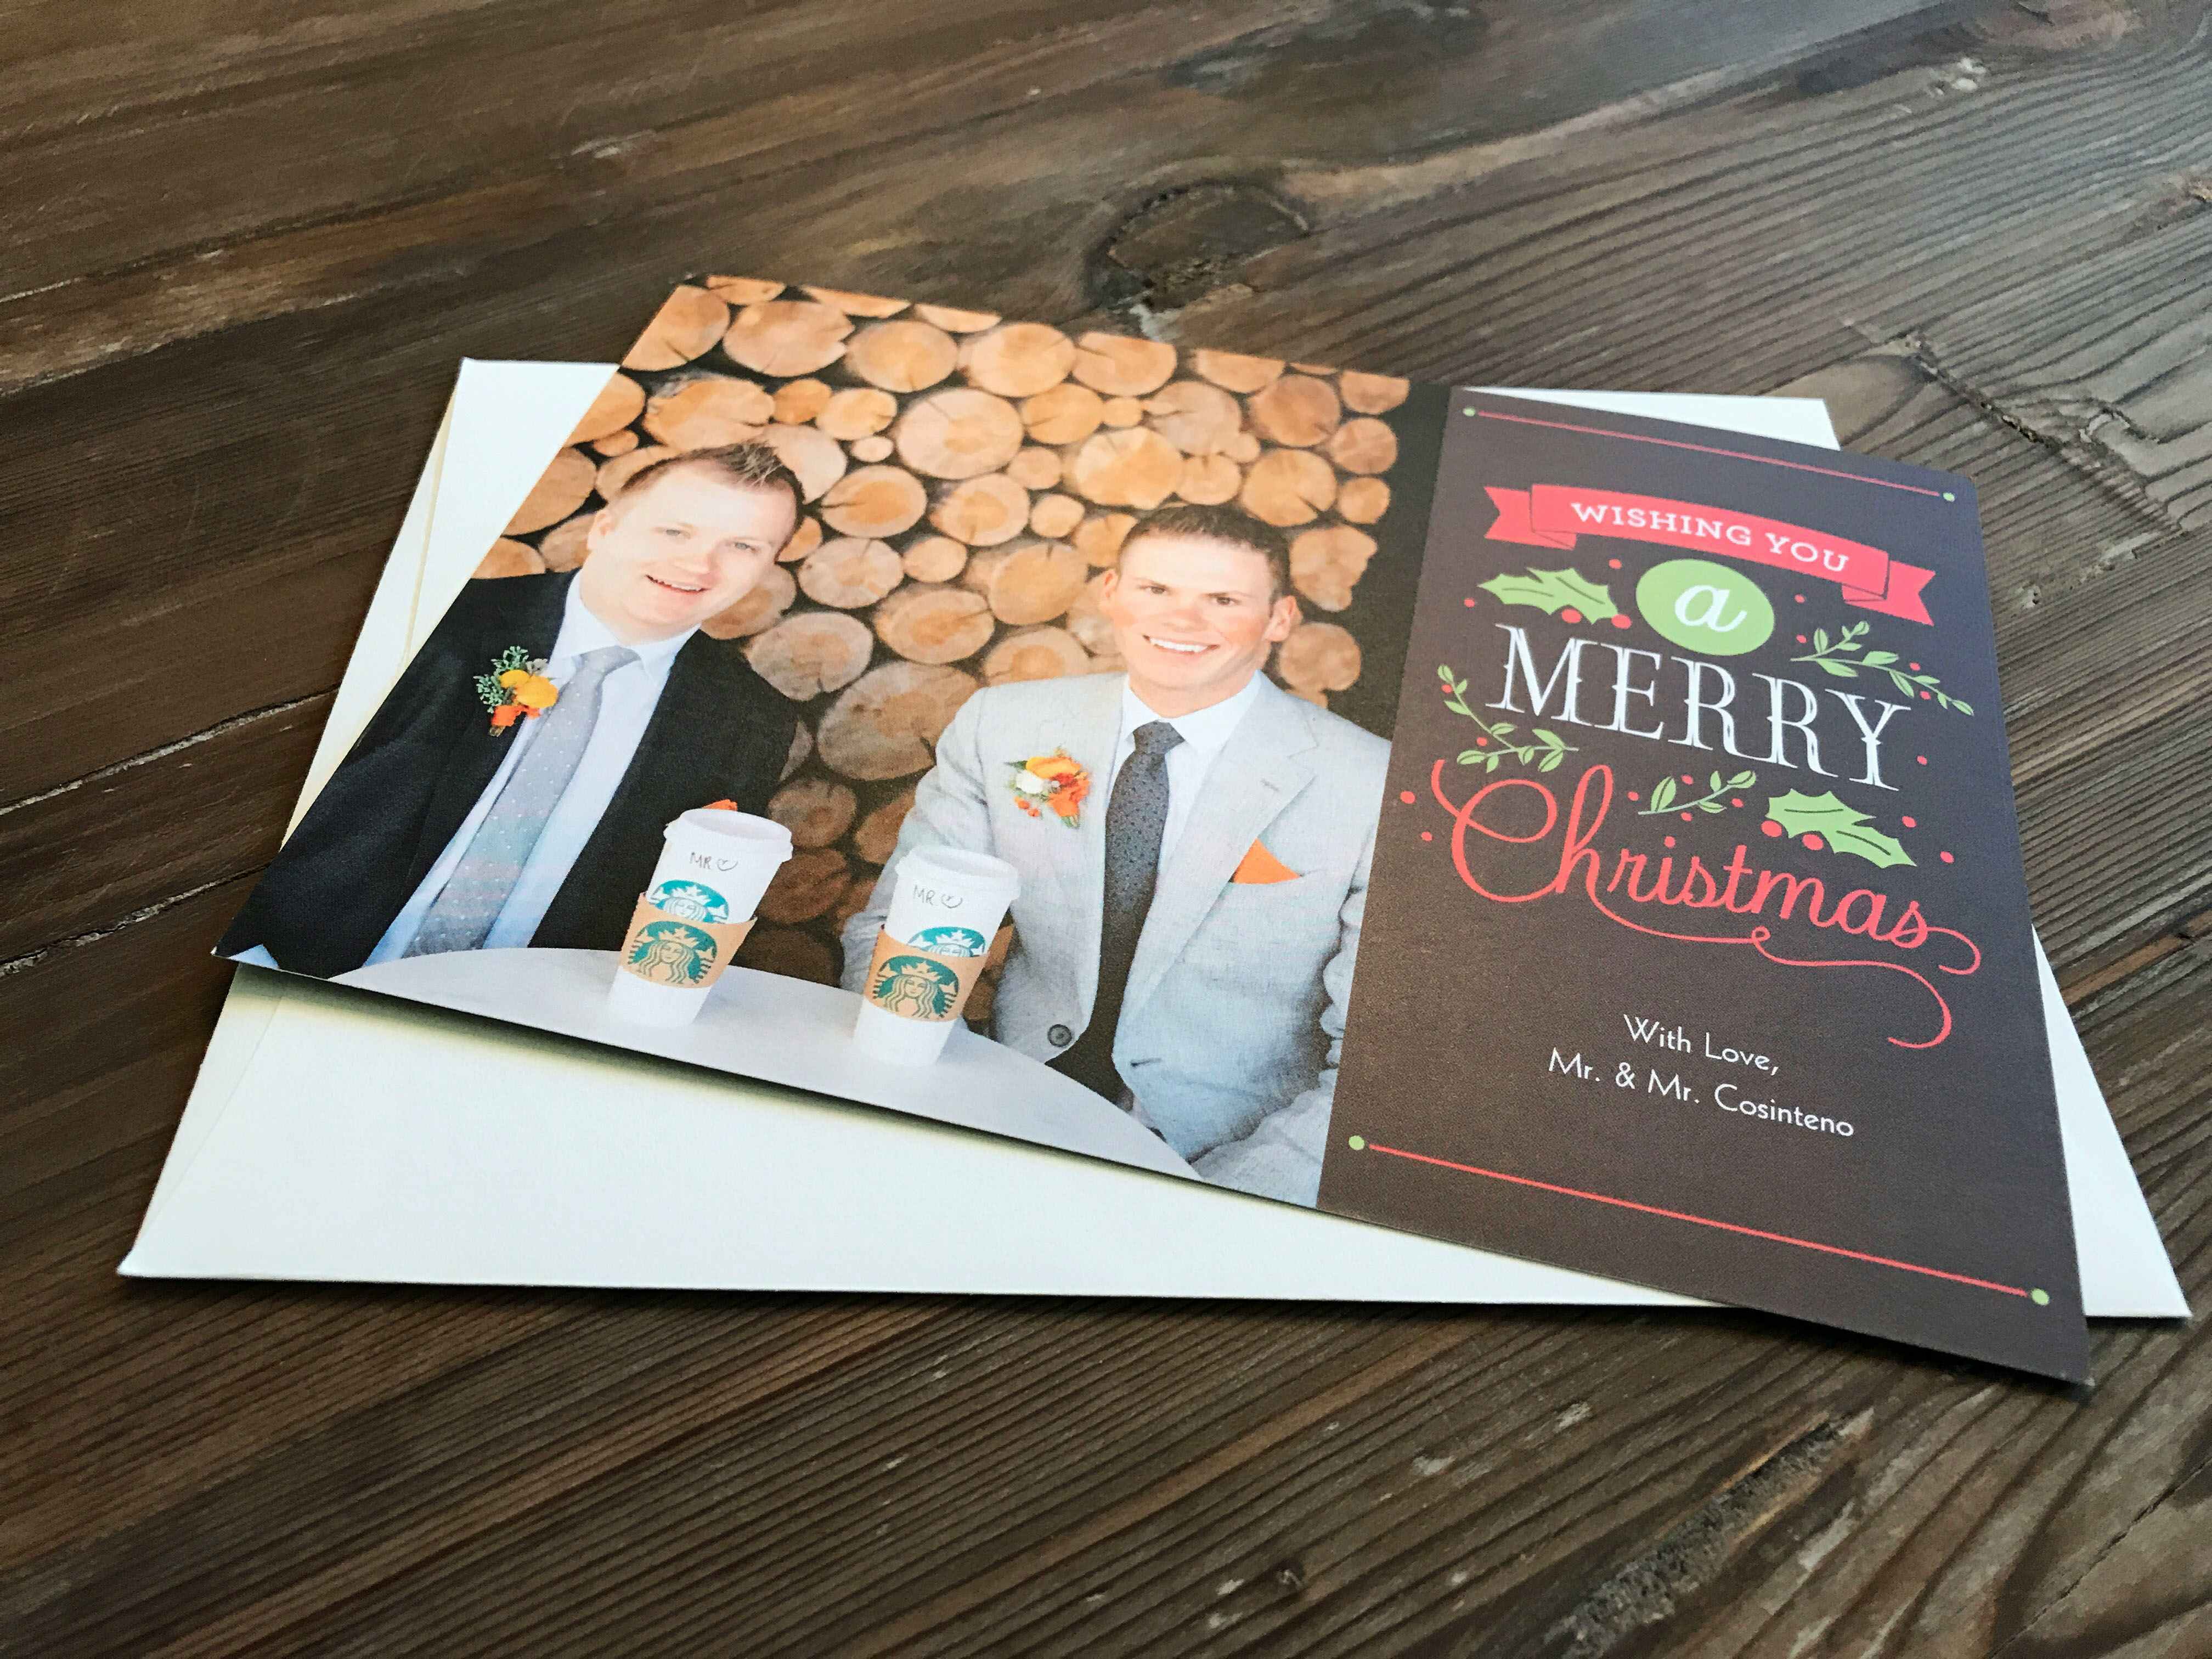 A Christmas photo card printed from the Costco photo center